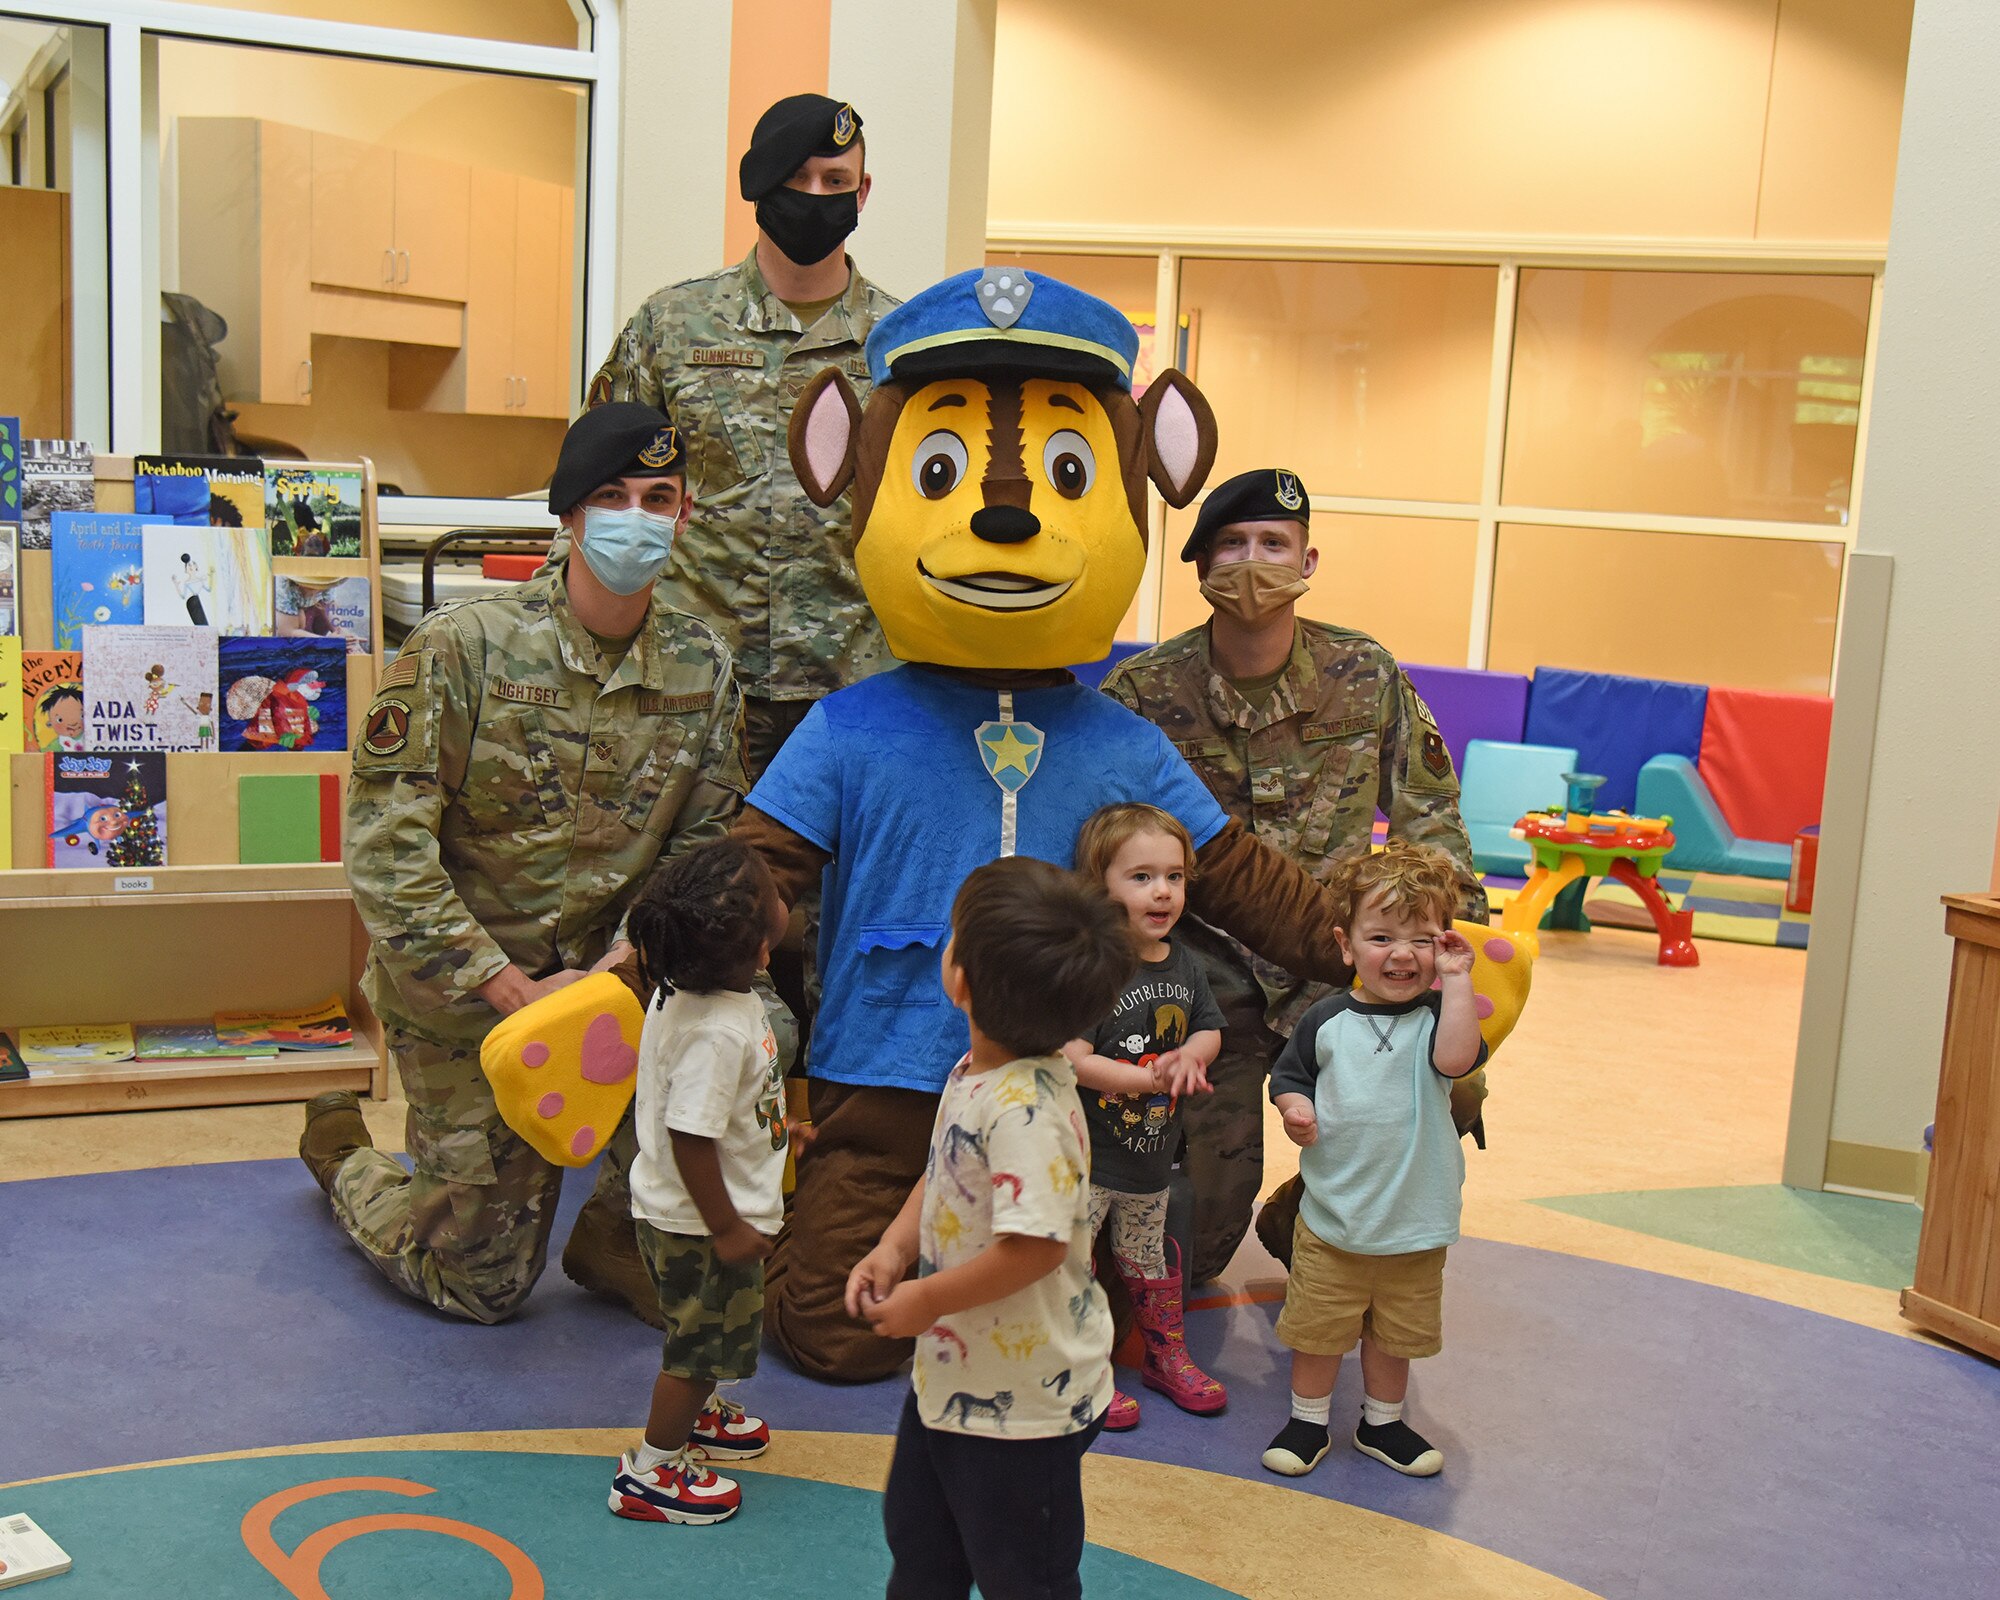 Members of the 14th Security Forces Squadron and their mascot, Chase the dog, pose for a photo with children at the Child Development Center, May 11, 2021, on Columbus Air Force Base, Mississippi. Columbus AFB had several events to show appreciation to the 14th Security Forces Squadron for National Police Week. (U.S. Air Force photo by Elizabeth Owens)